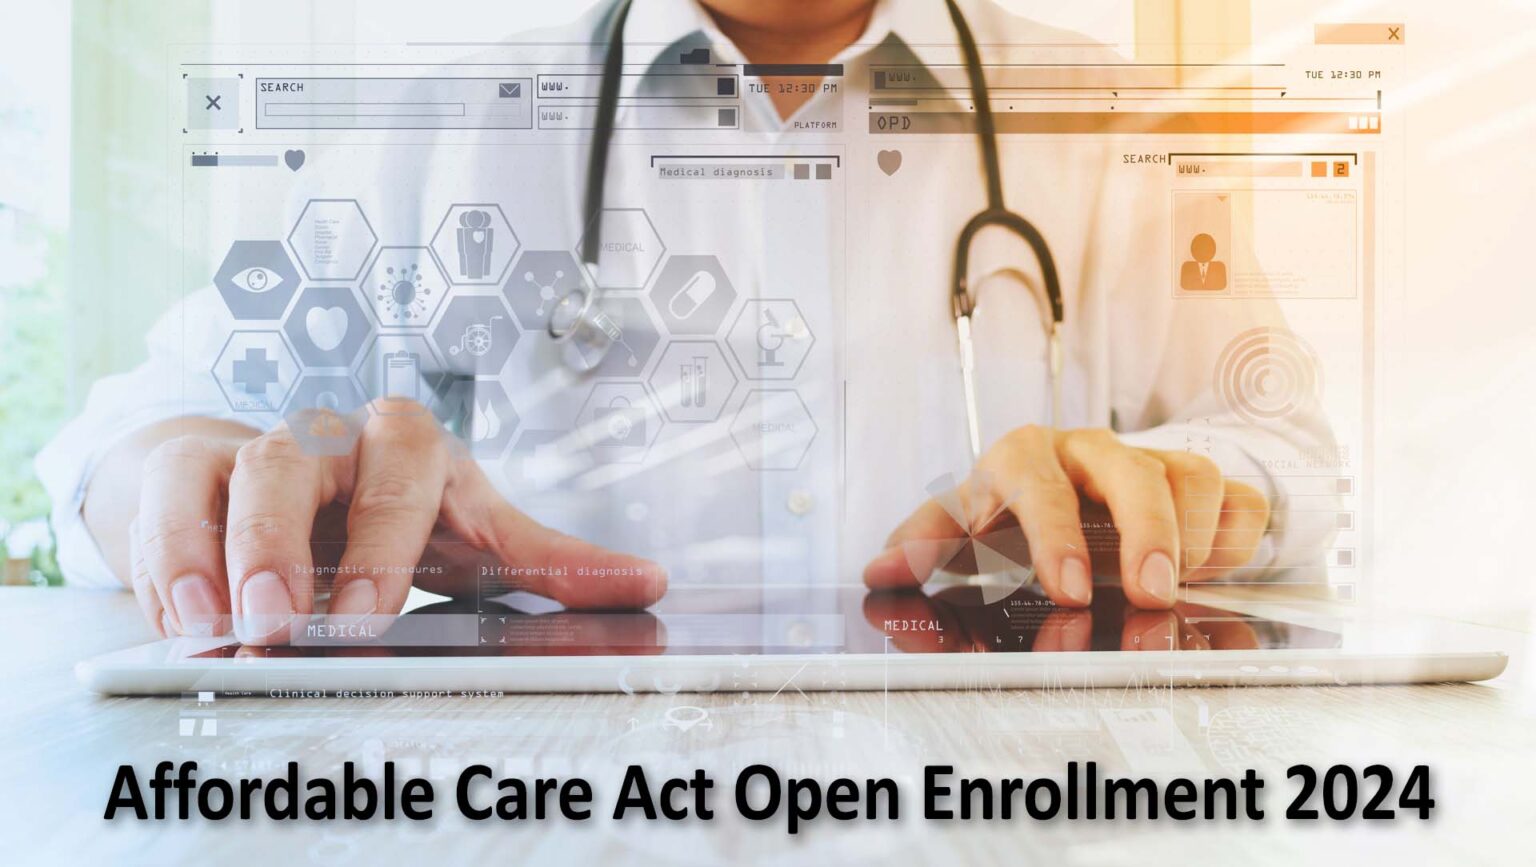 Open Enrollment for the Affordable Care Act Health Insurance